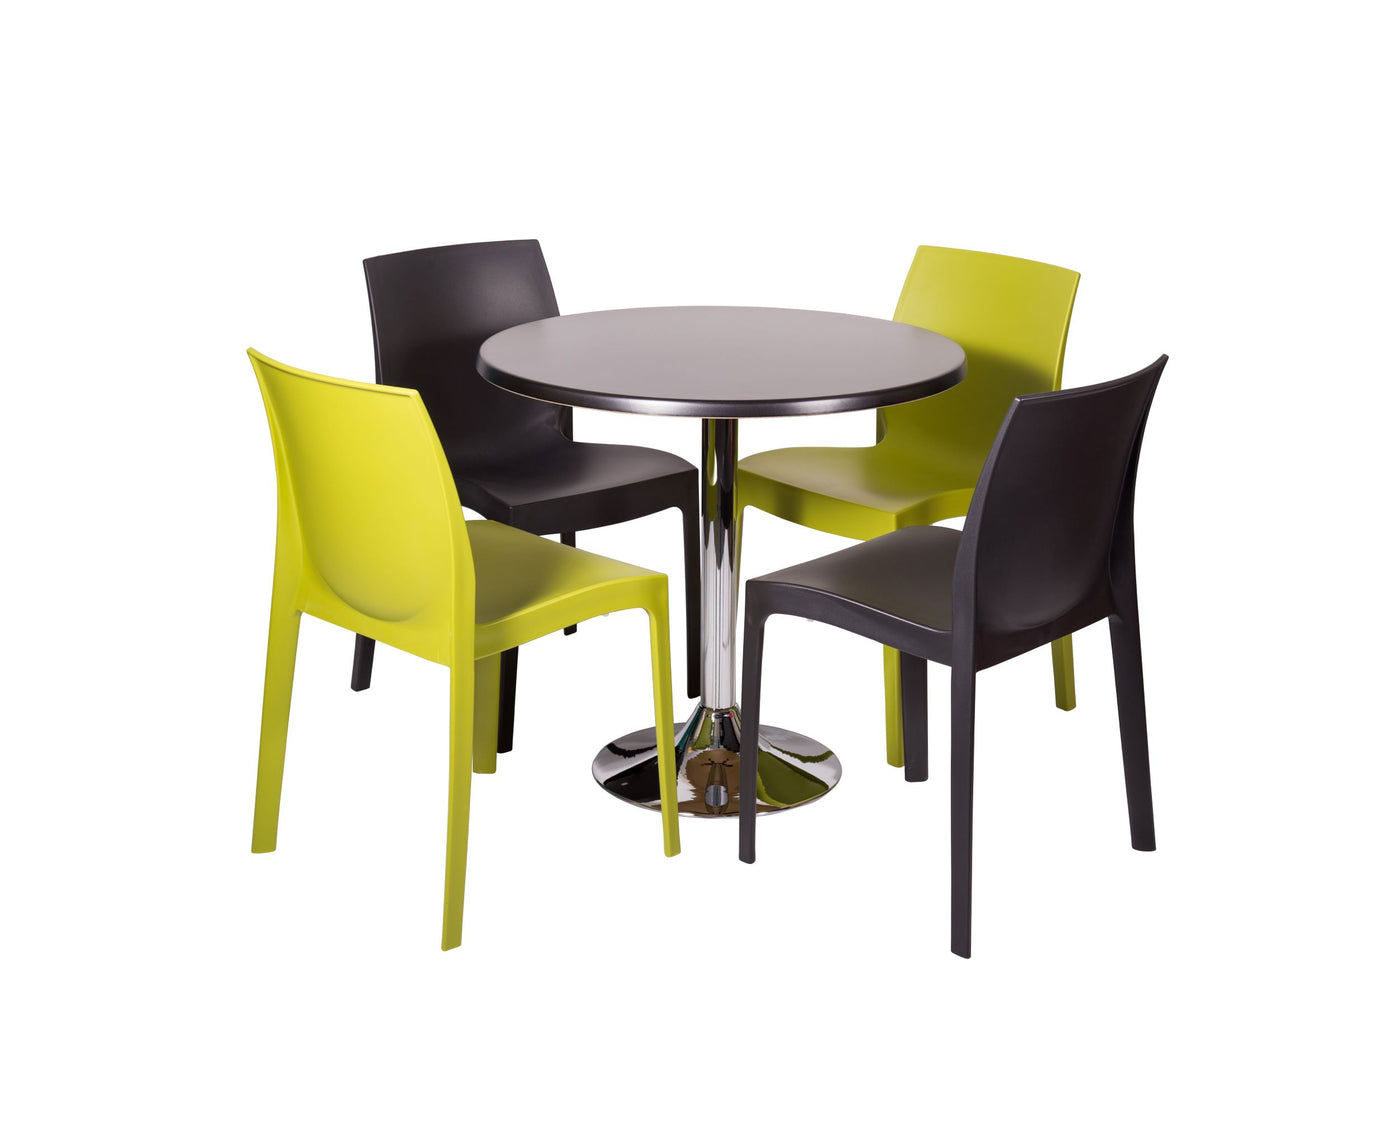 Polypropylene durable chairs